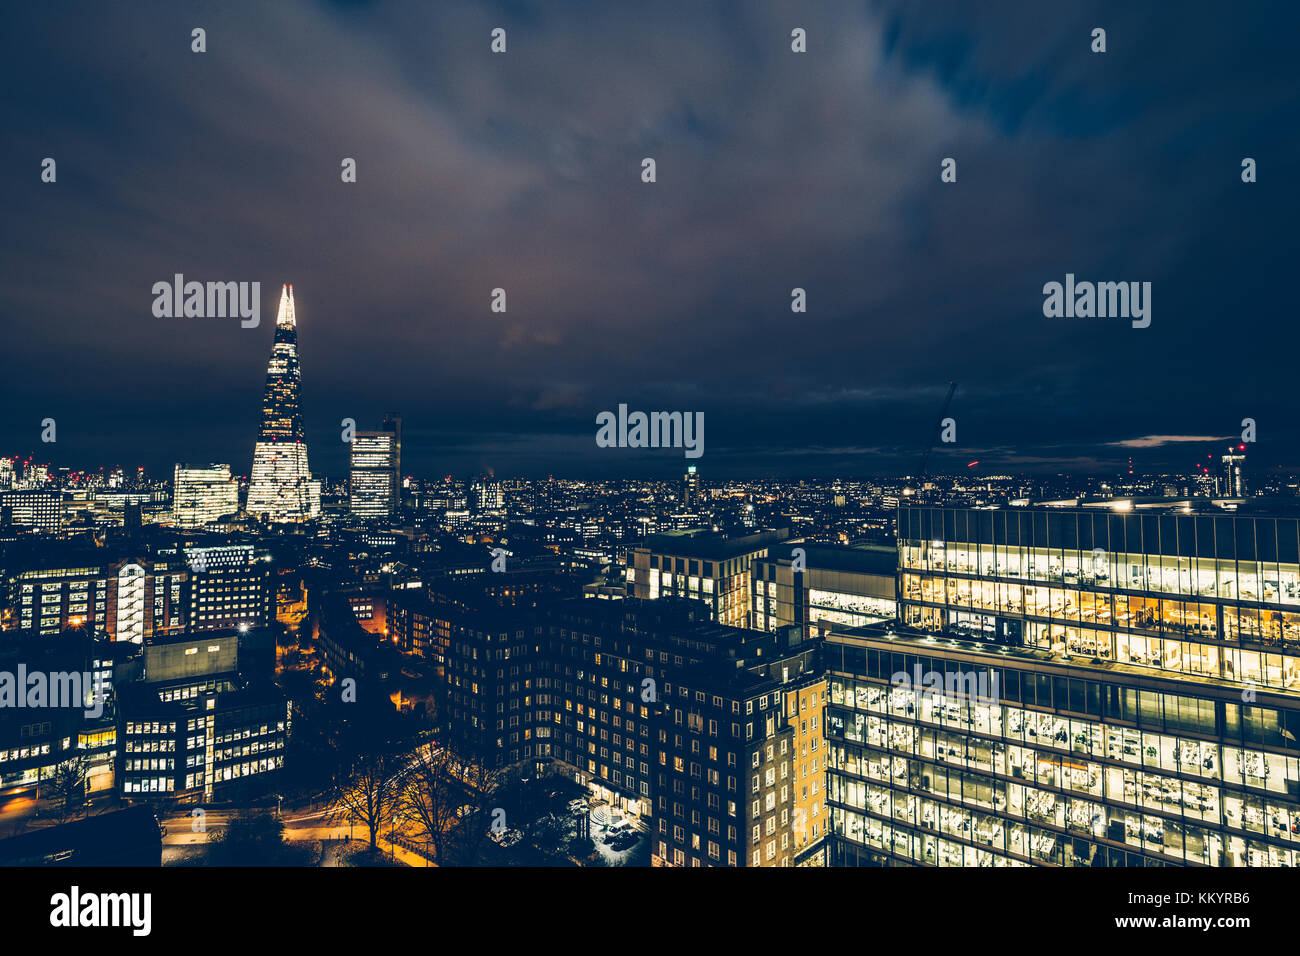 Aerial cityscape view of rooftops and office buildings on modern London skyline at night Stock Photo